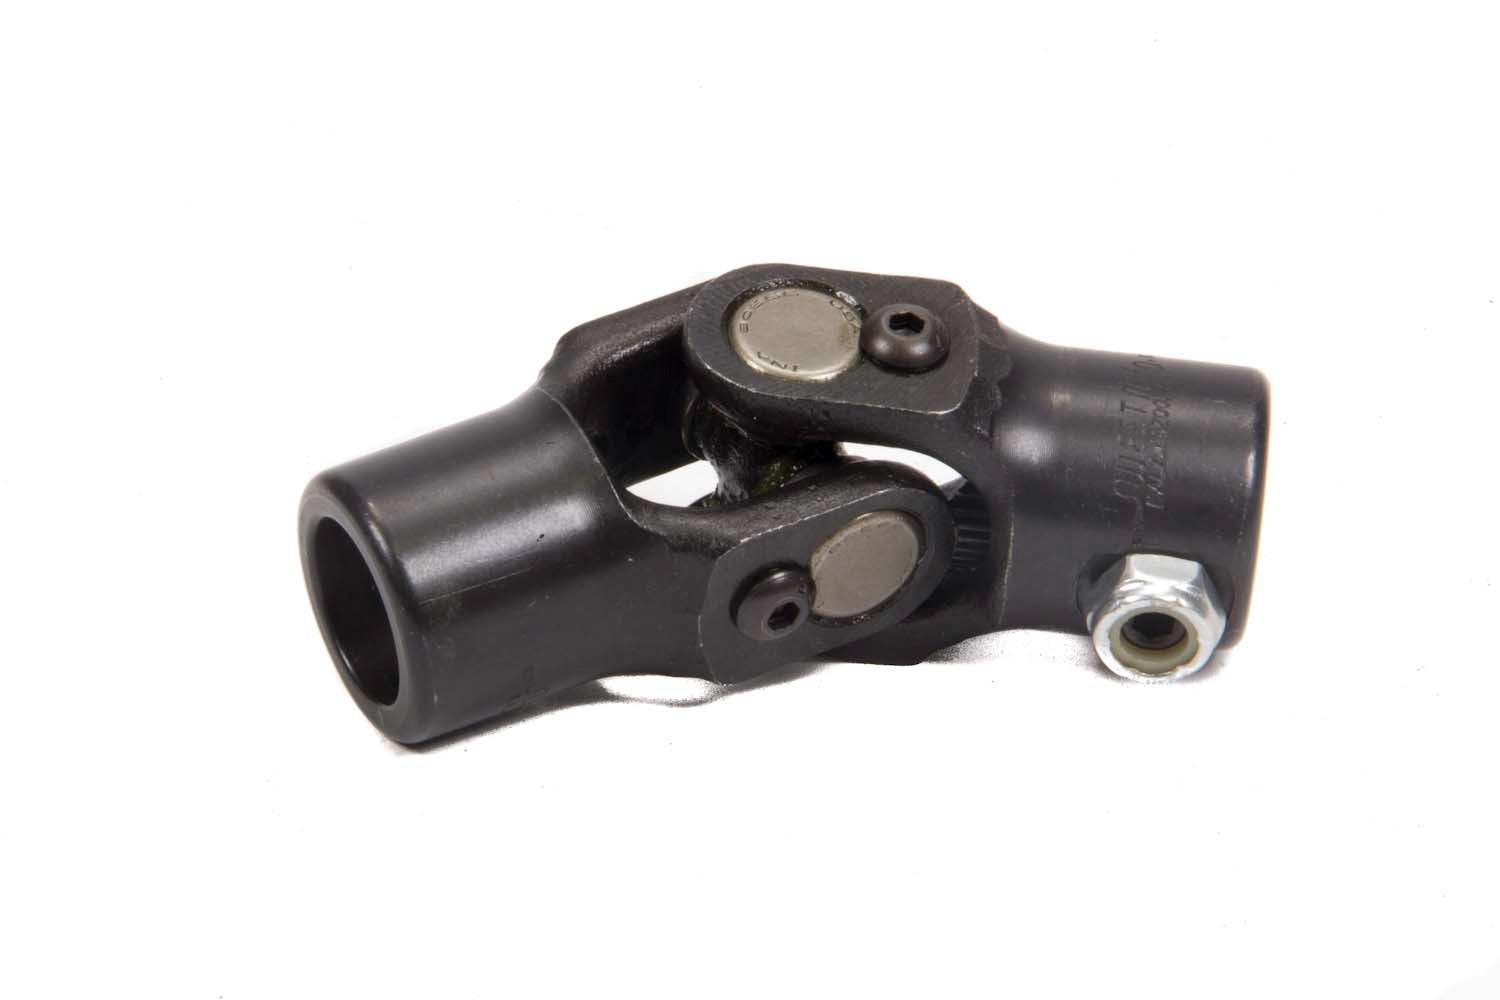 U-Joint 3/4inDDx 3/4inDD - Burlile Performance Products